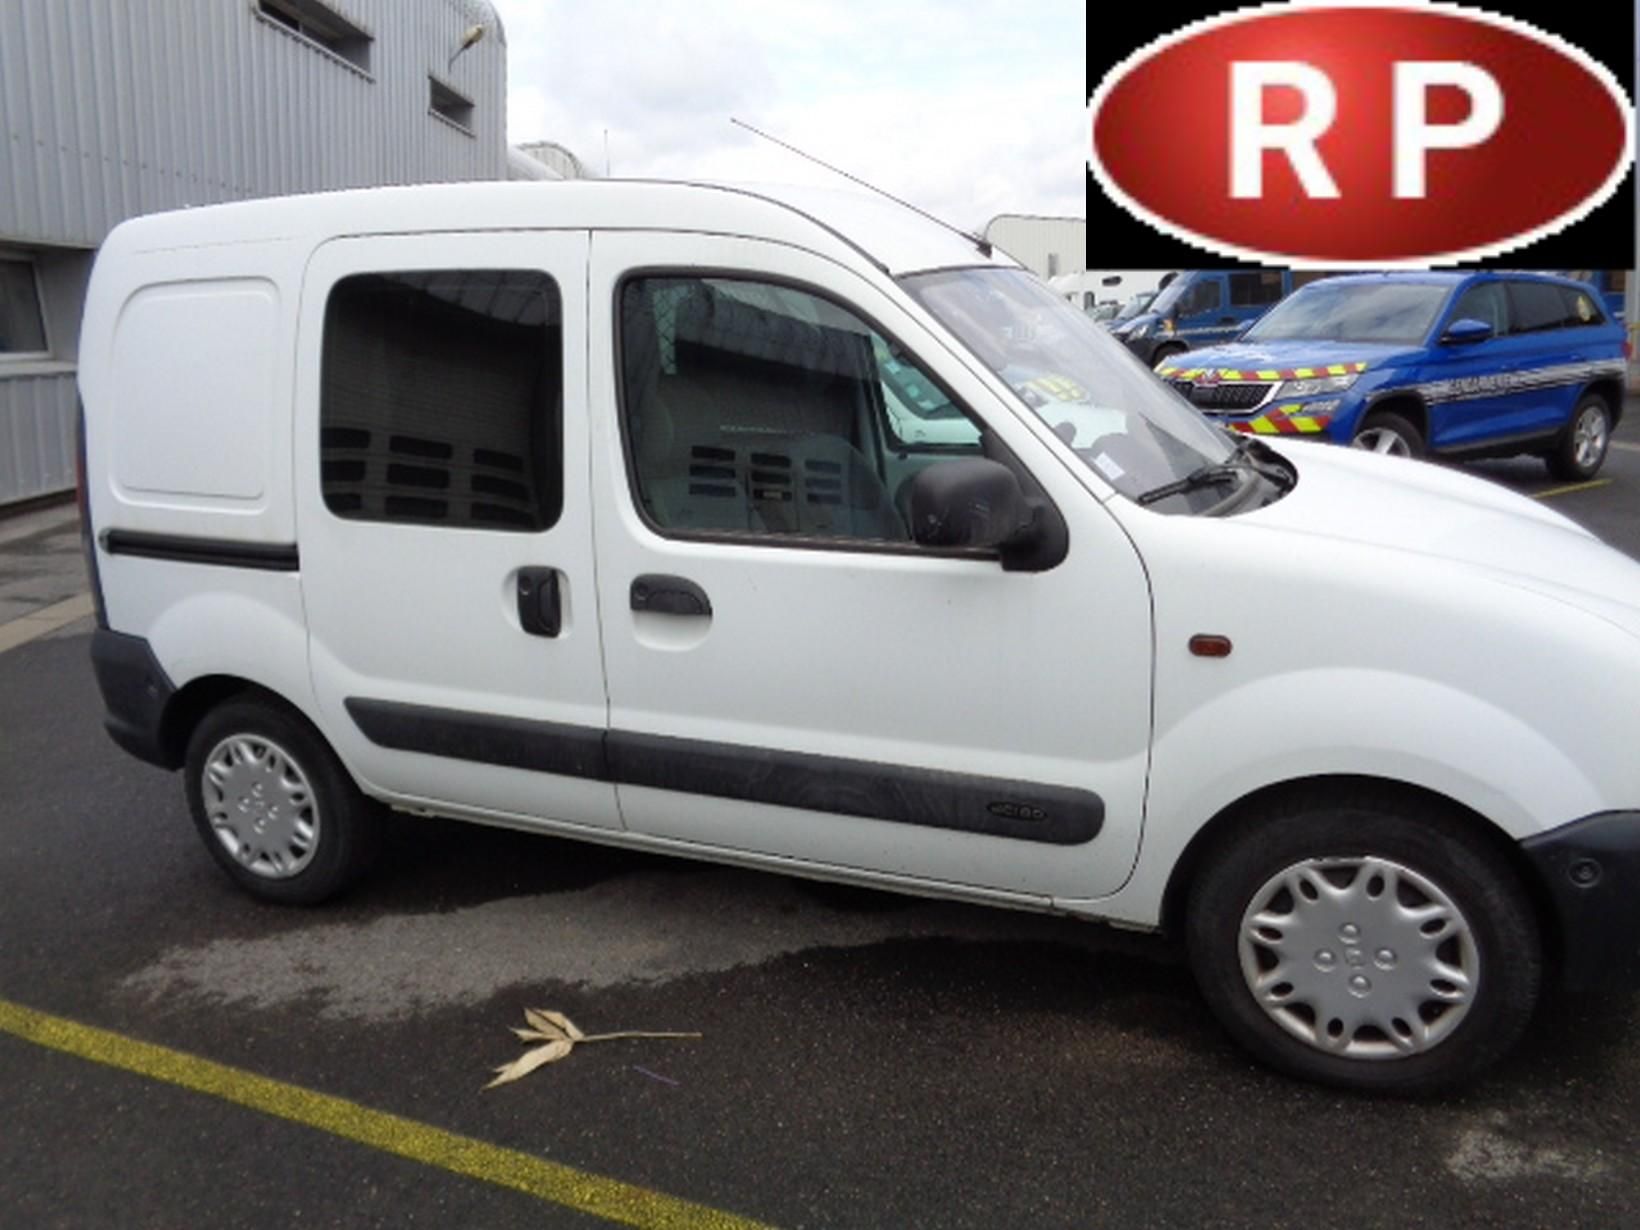 Null [RP] Utilitaire RENAULT KANGOO I Express fourgon 1.5 dCi 80, Gazole, 2 plac&hellip;